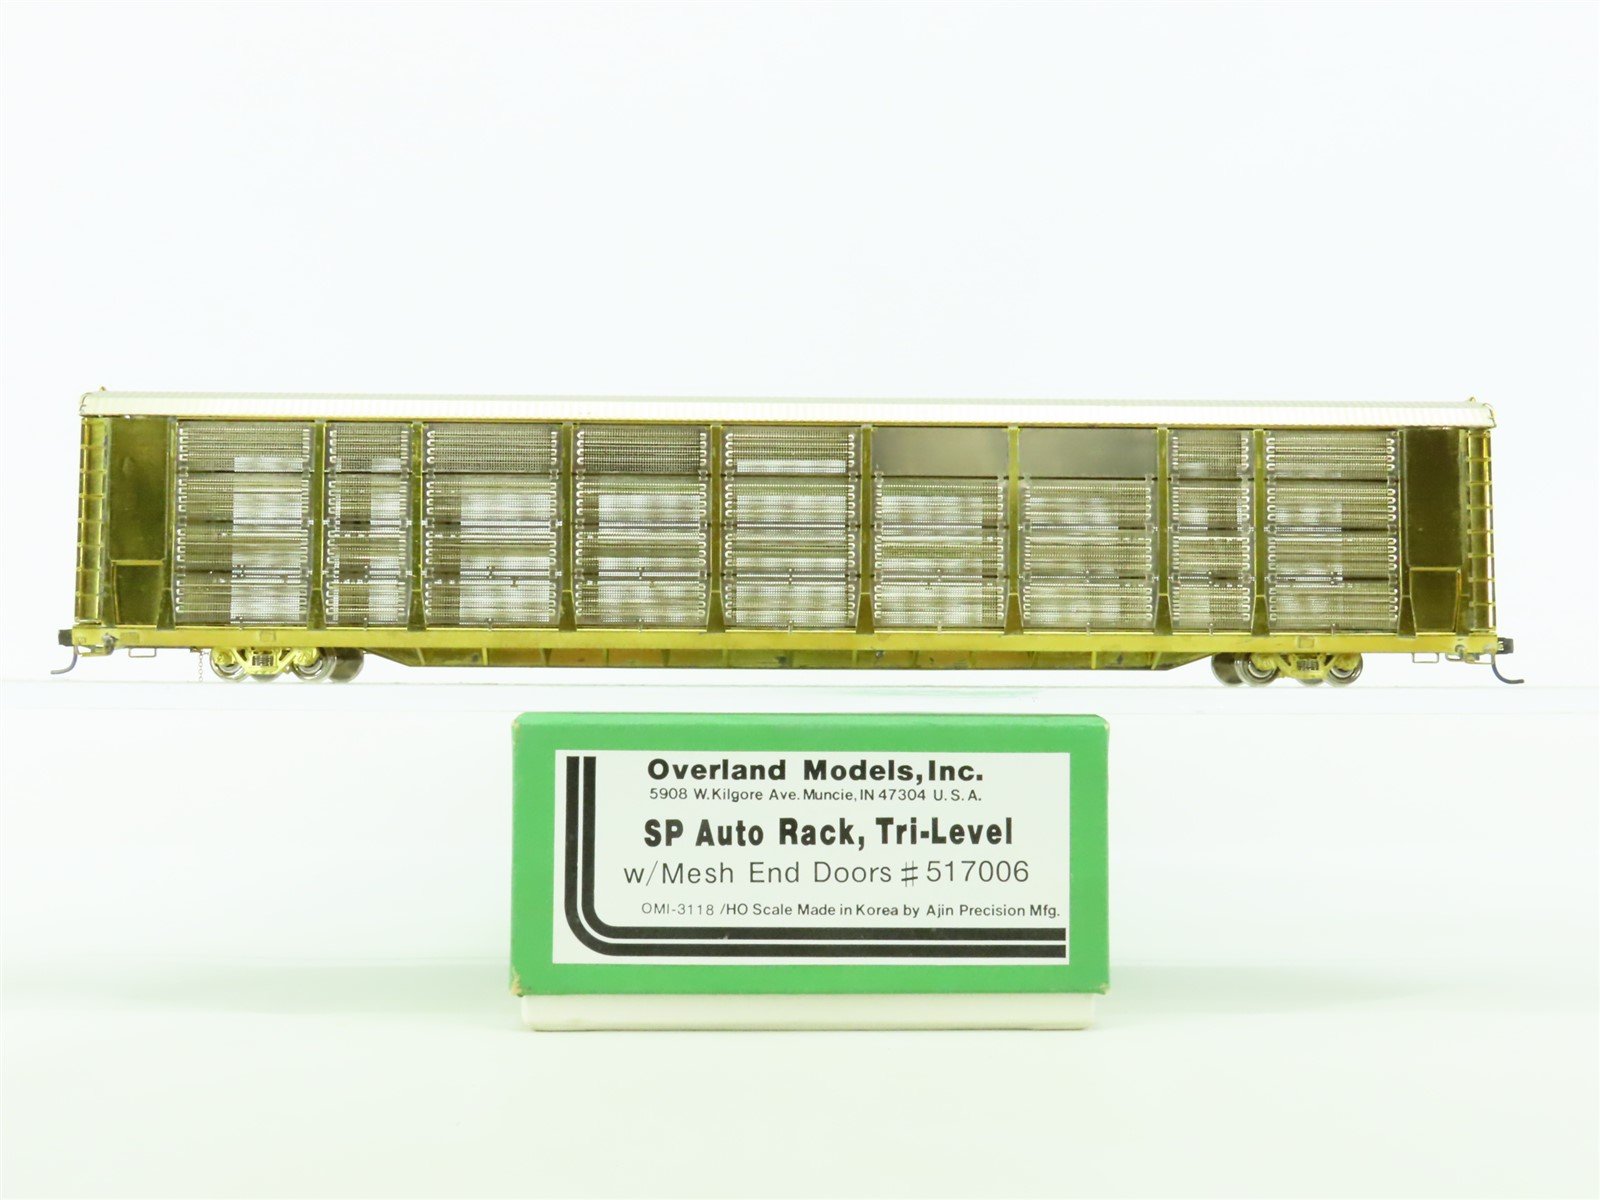 HO Overland Models OMI-3118 BRASS Undecorated SP Tri-Level Auto Rack Car #517006